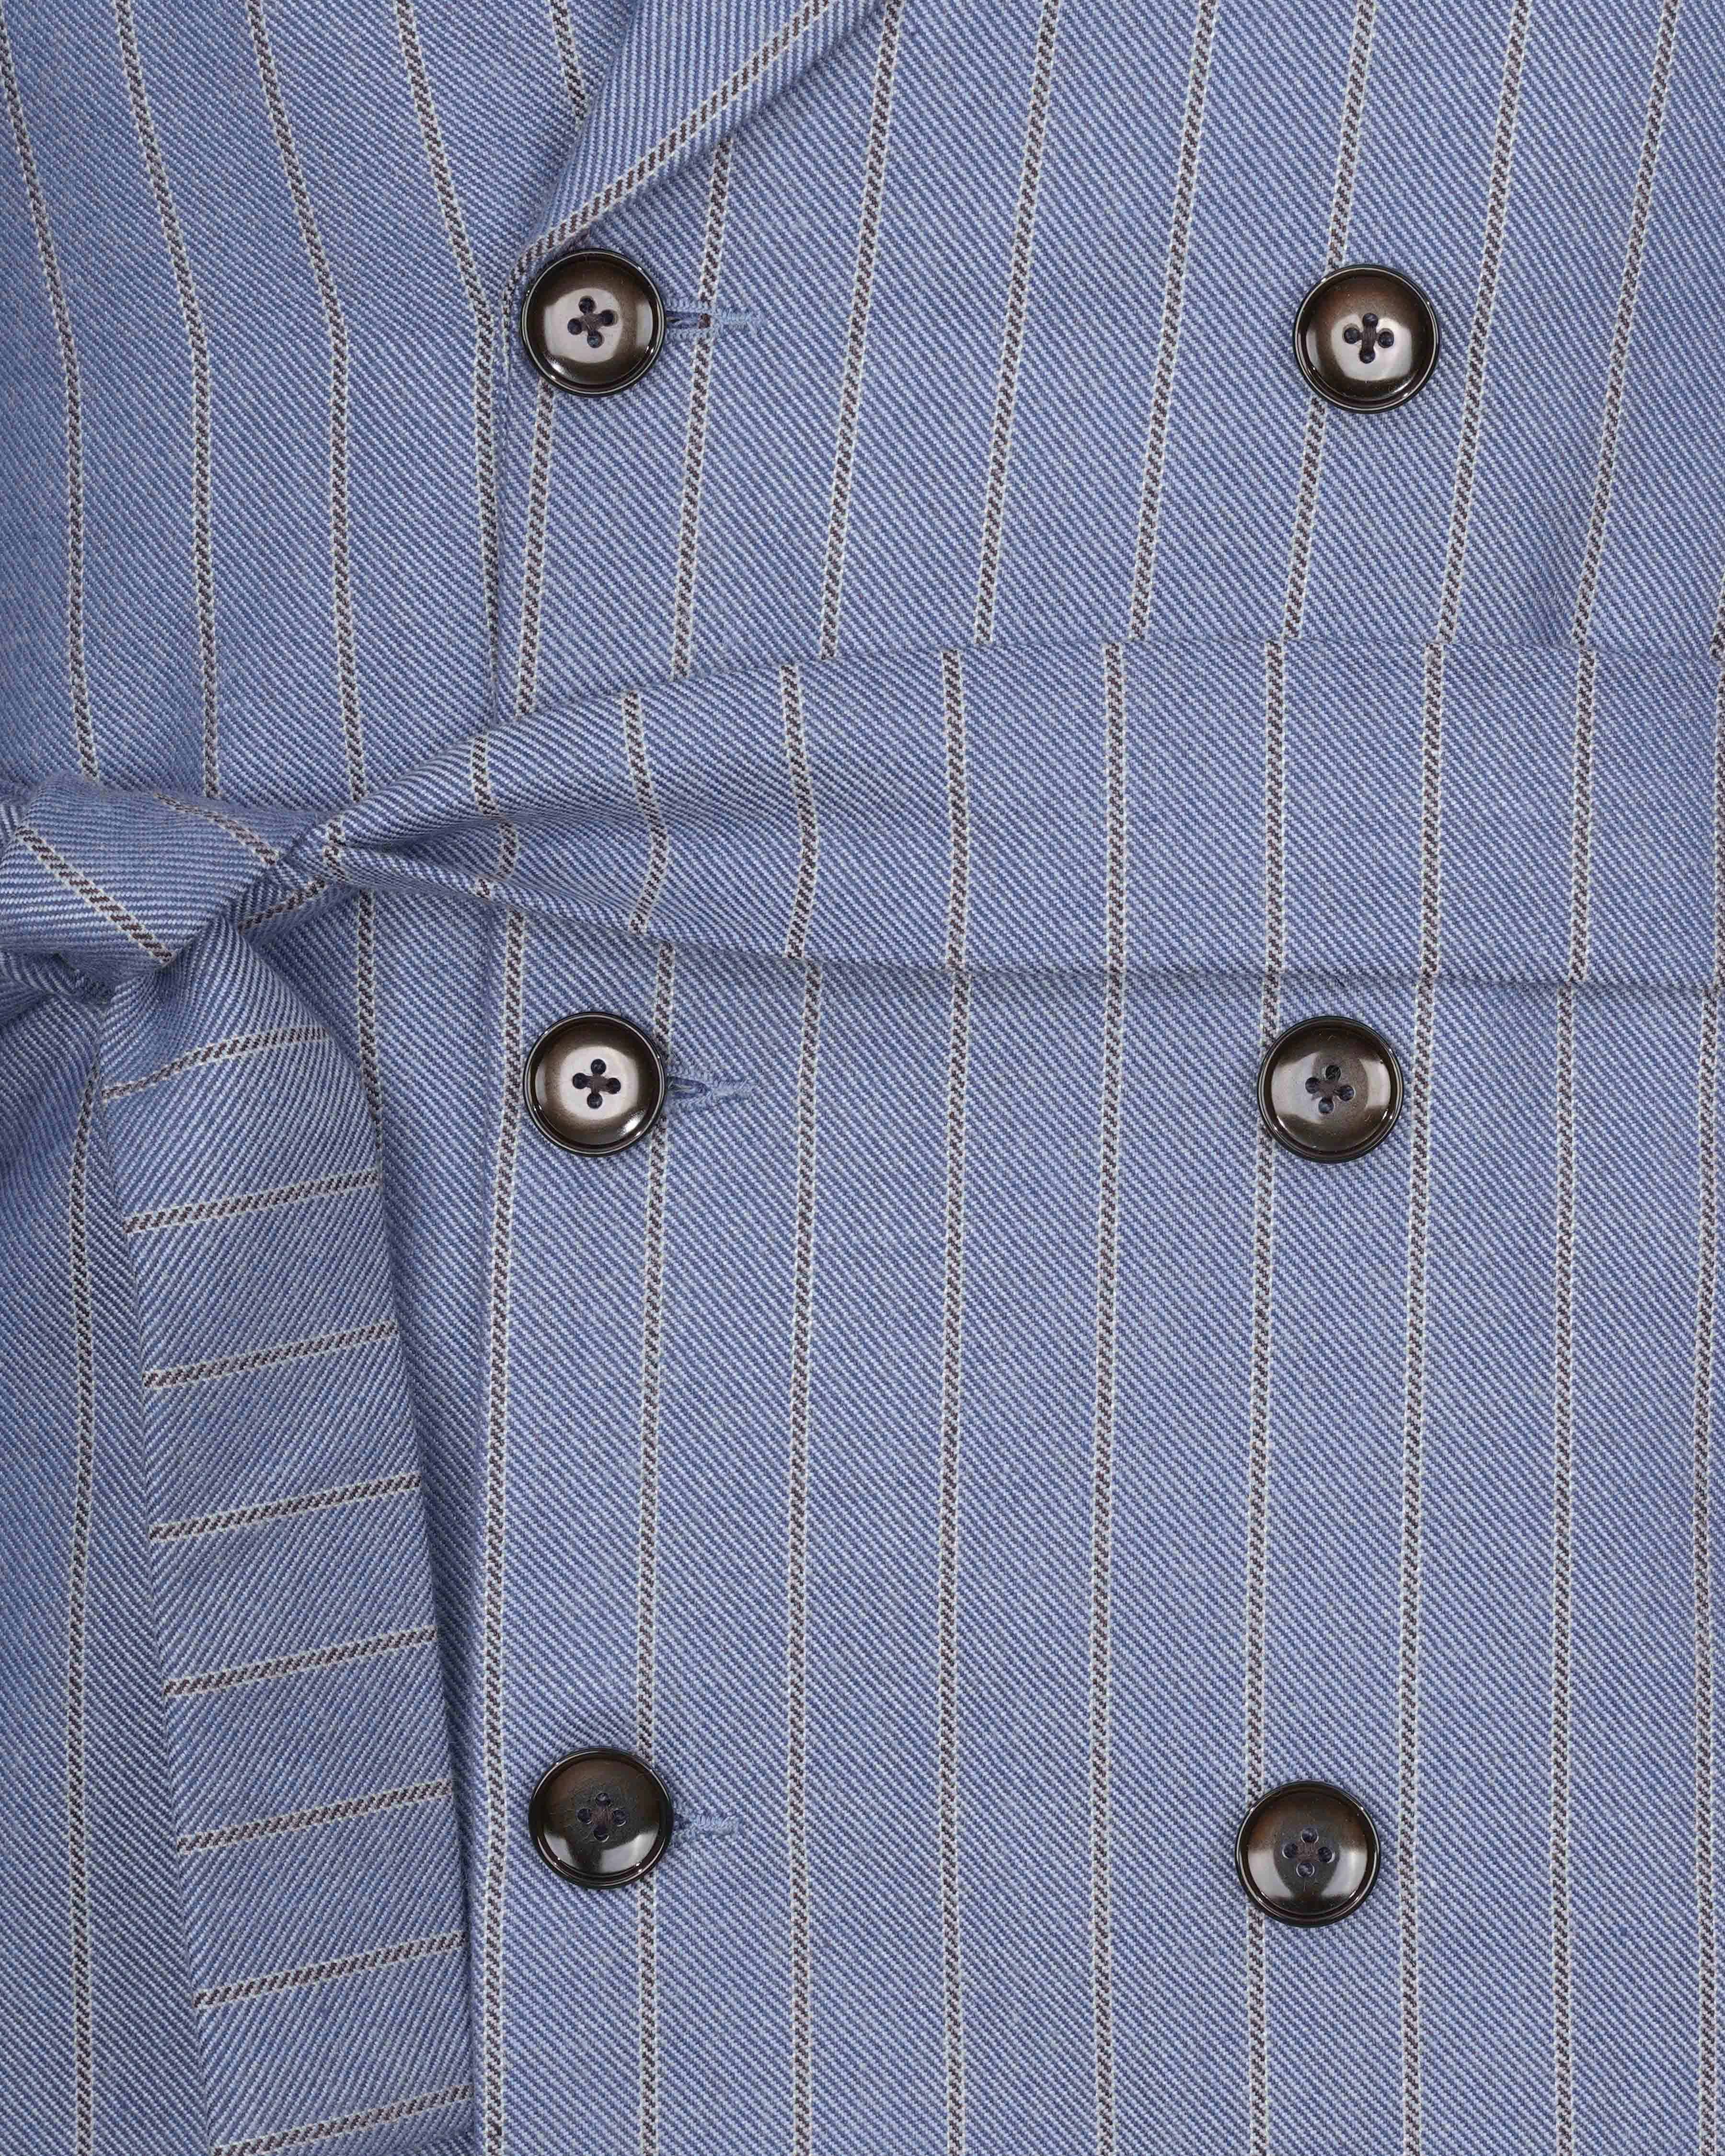 Waterloo Blue Striped Double Breasted Designer Trench Coat TCB2086-DB-36, TCB2086-DB-38, TCB2086-DB-40, TCB2086-DB-42, TCB2086-DB-44, TCB2086-DB-46, TCB2086-DB-48, TCB2086-DB-50, TCB2086-DB-52, TCB2086-DB-54, TCB2086-DB-56, TCB2086-DB-58, TCB2086-DB-60